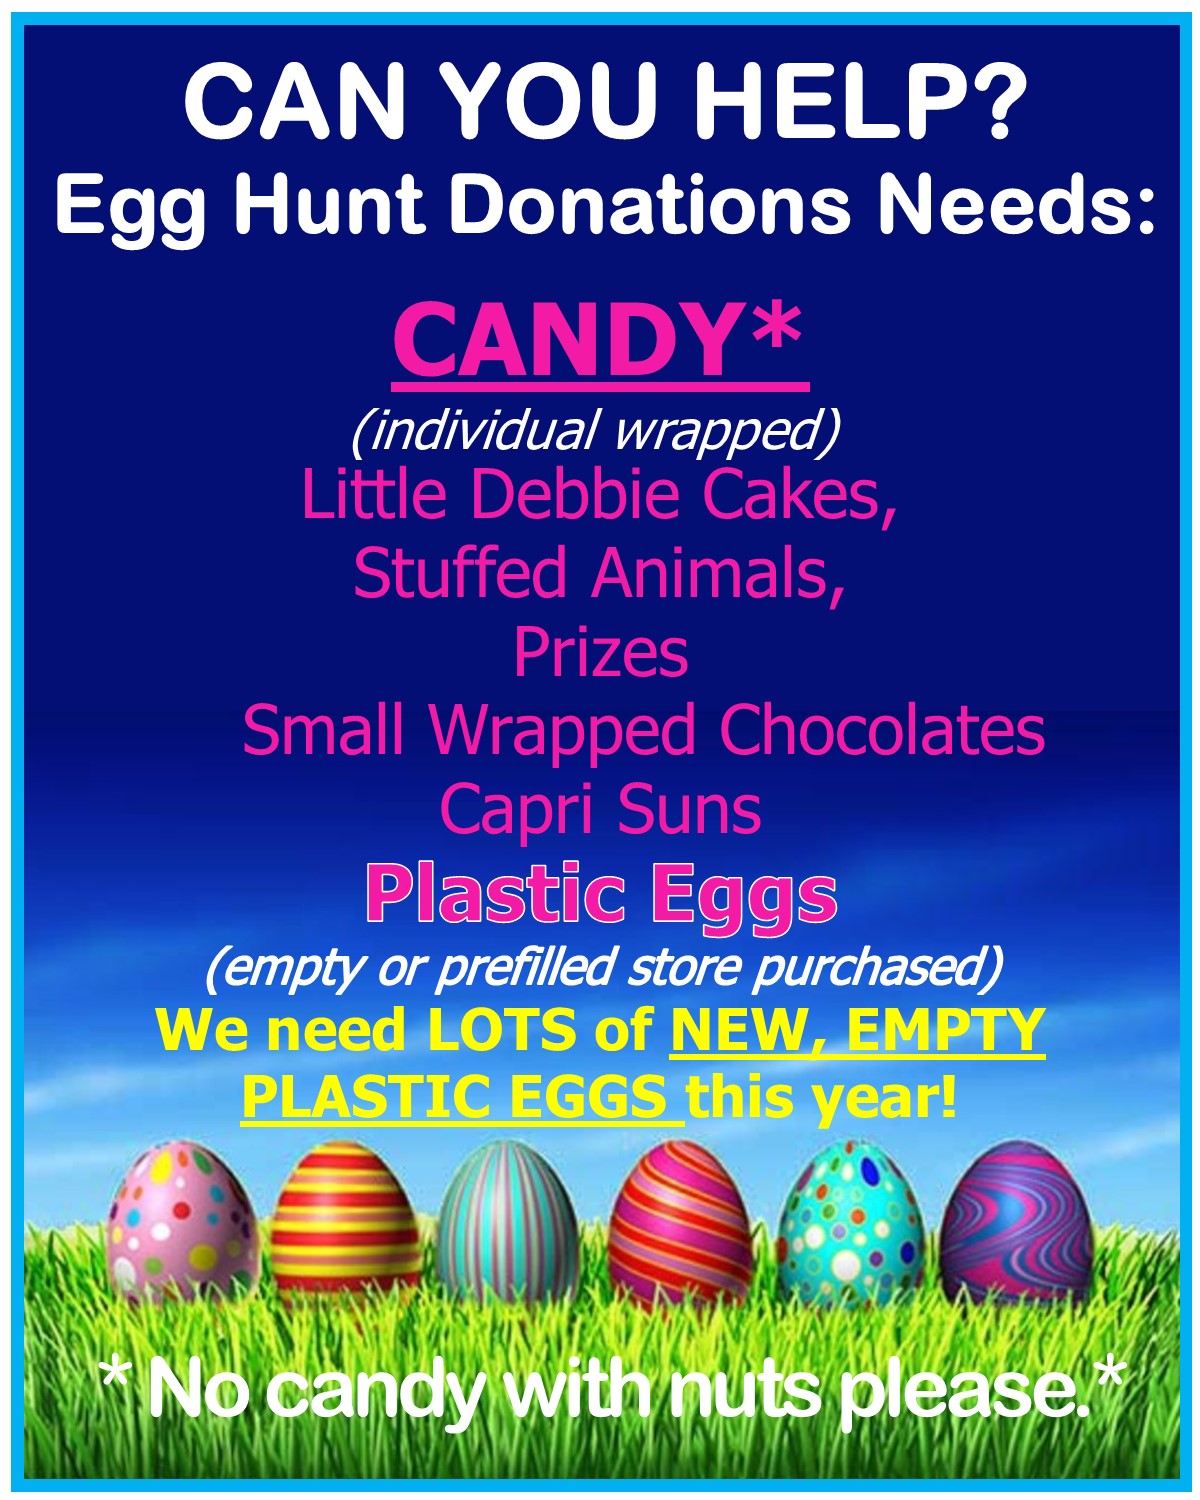 Egg Hunt Candy Donations Request#2